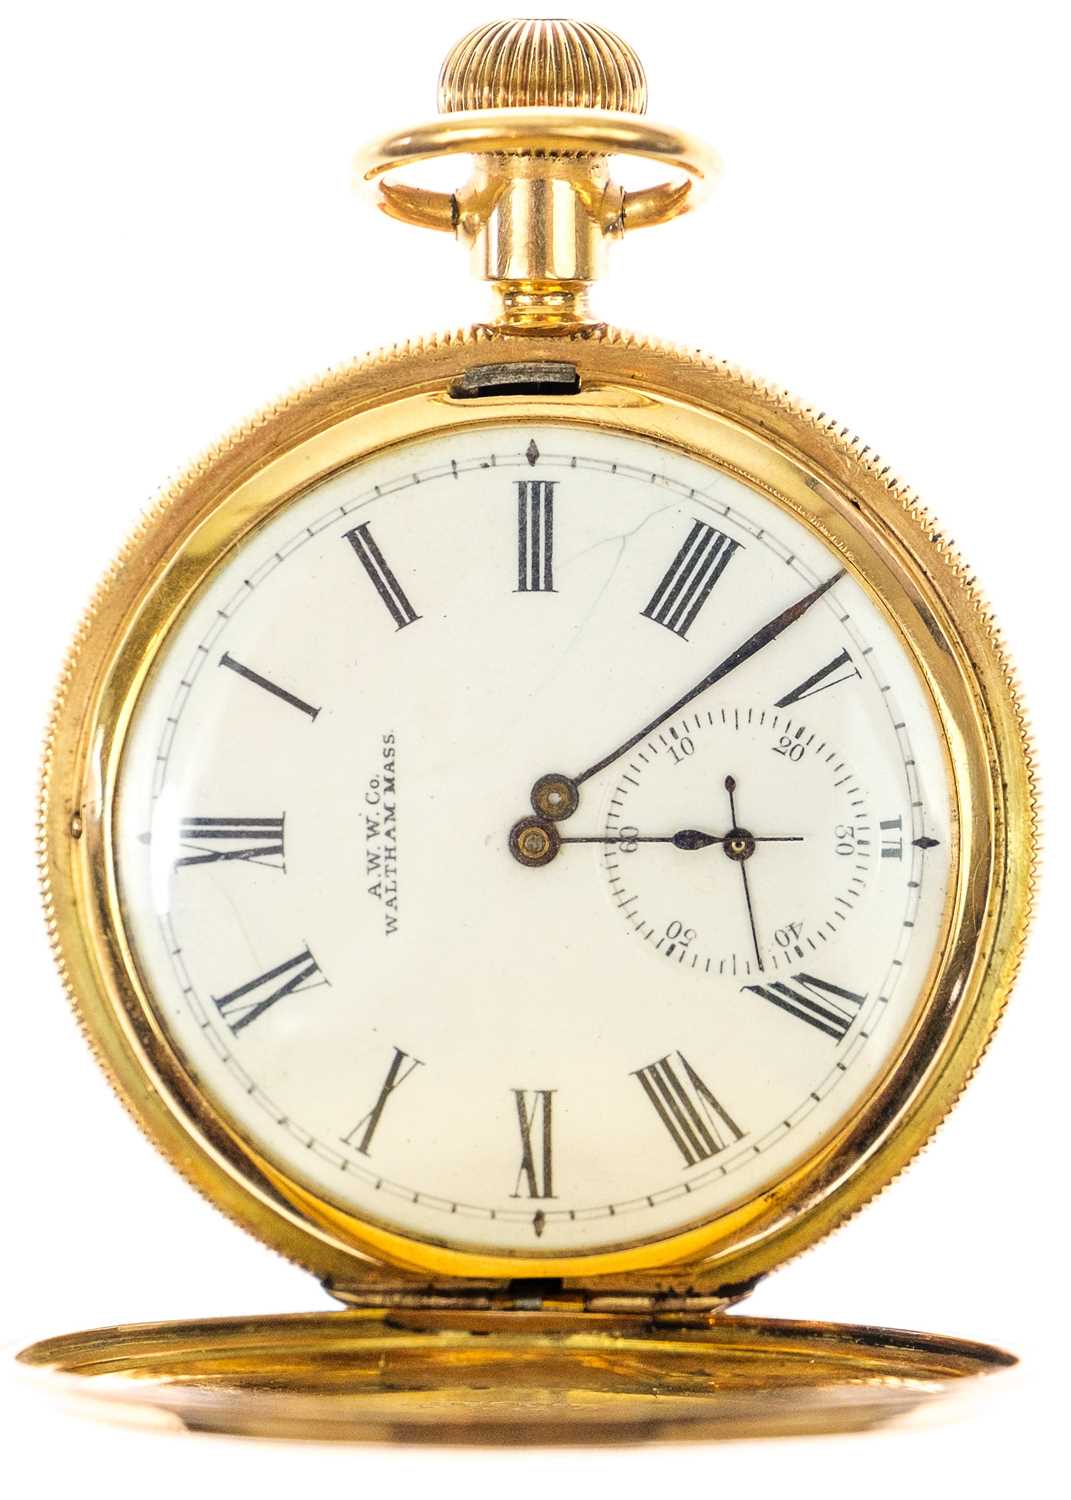 WALTHAM - A 14ct full hunter crown wind pocket watch. - Image 2 of 7